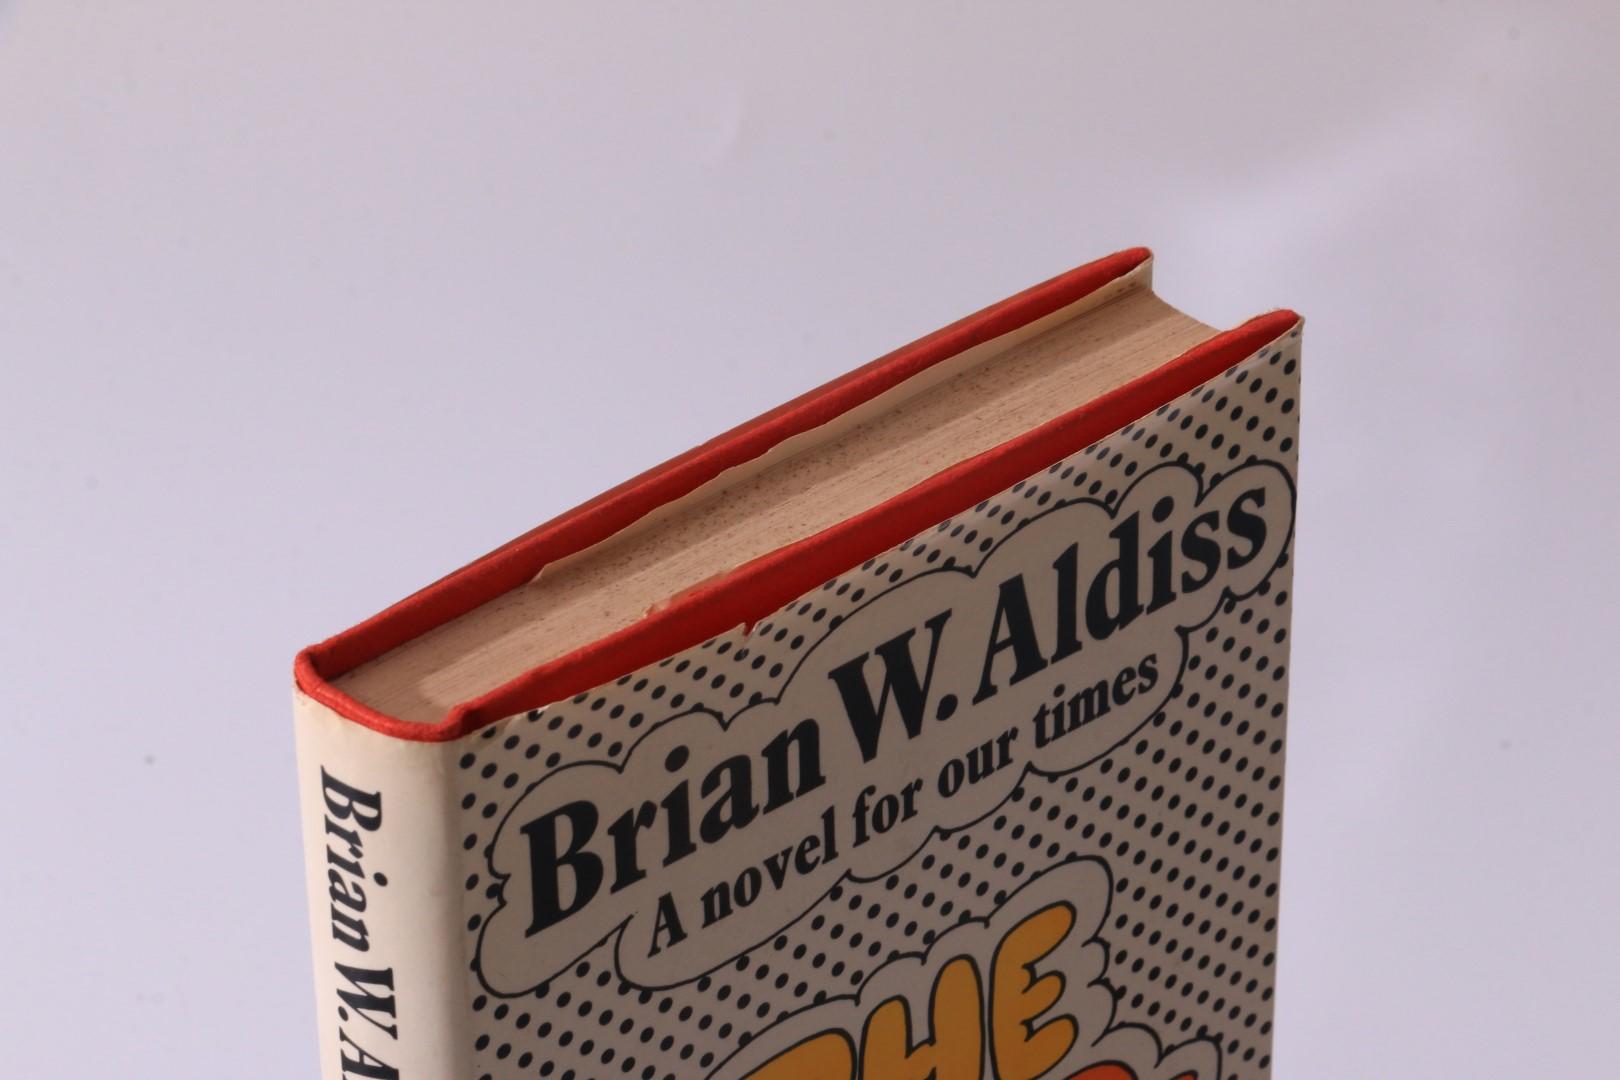 Brian Aldiss - The Hand-Reared Boy - Weidenfeld & Nicolson, 1970, Signed First Edition.